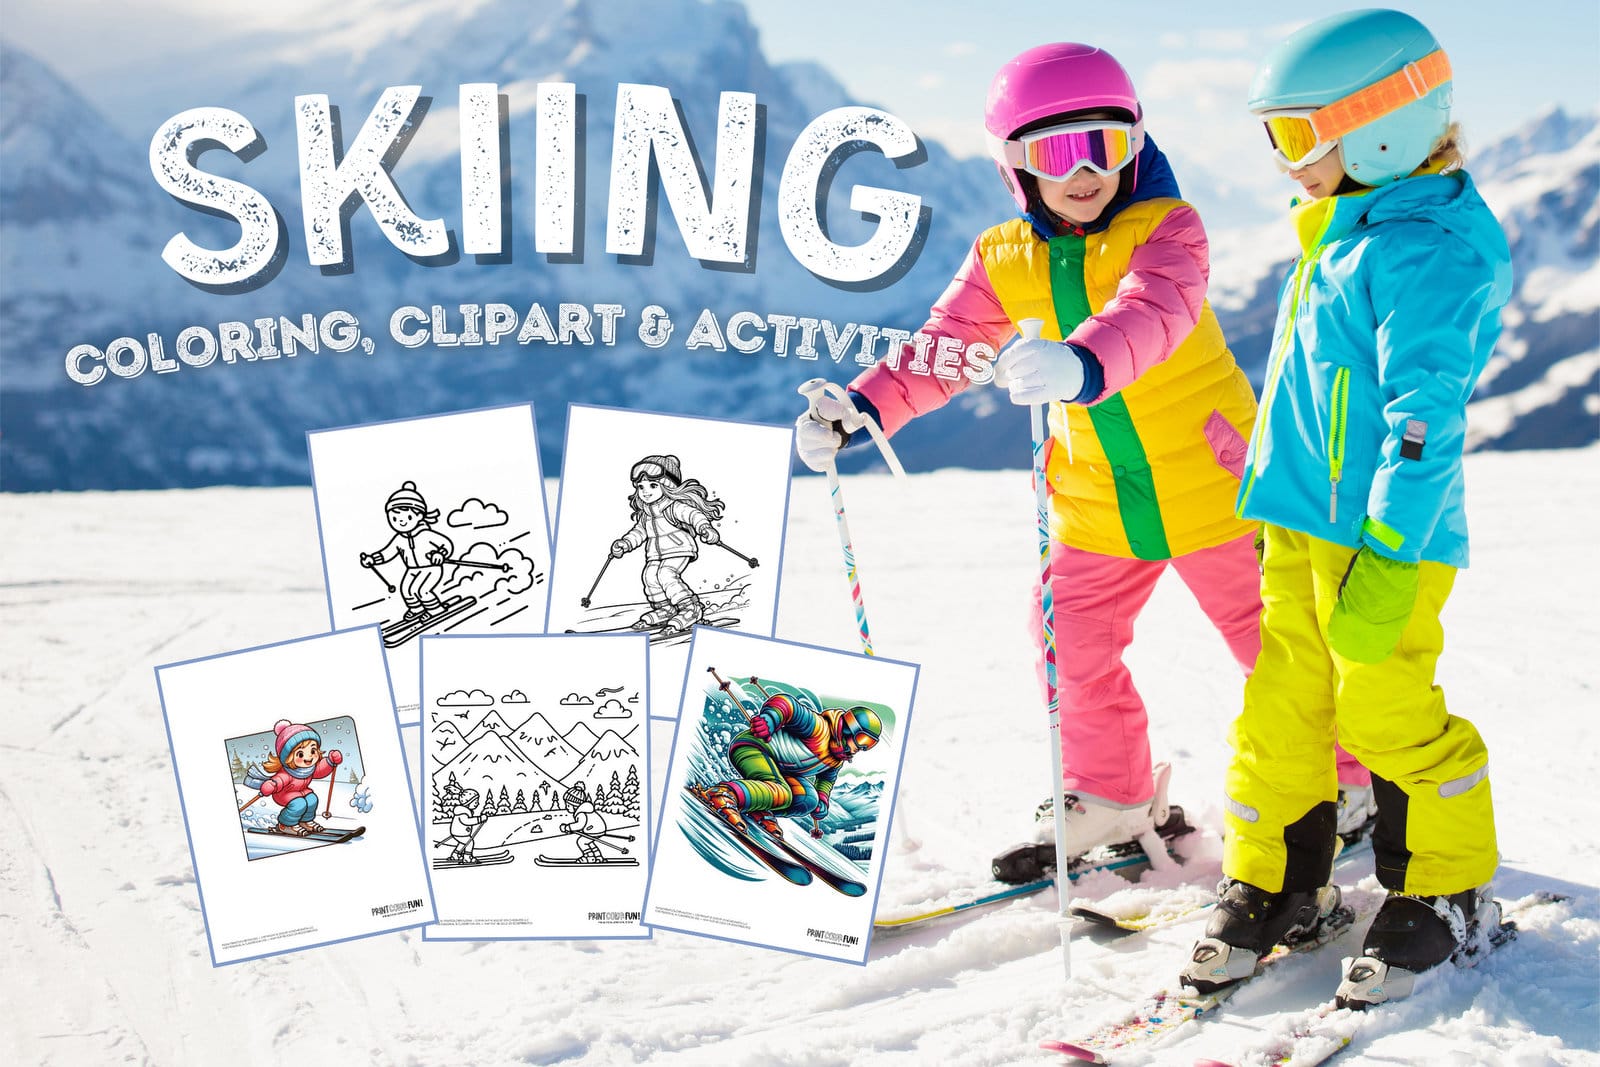 Skiing coloring page clipart activities from PrintColorFun com